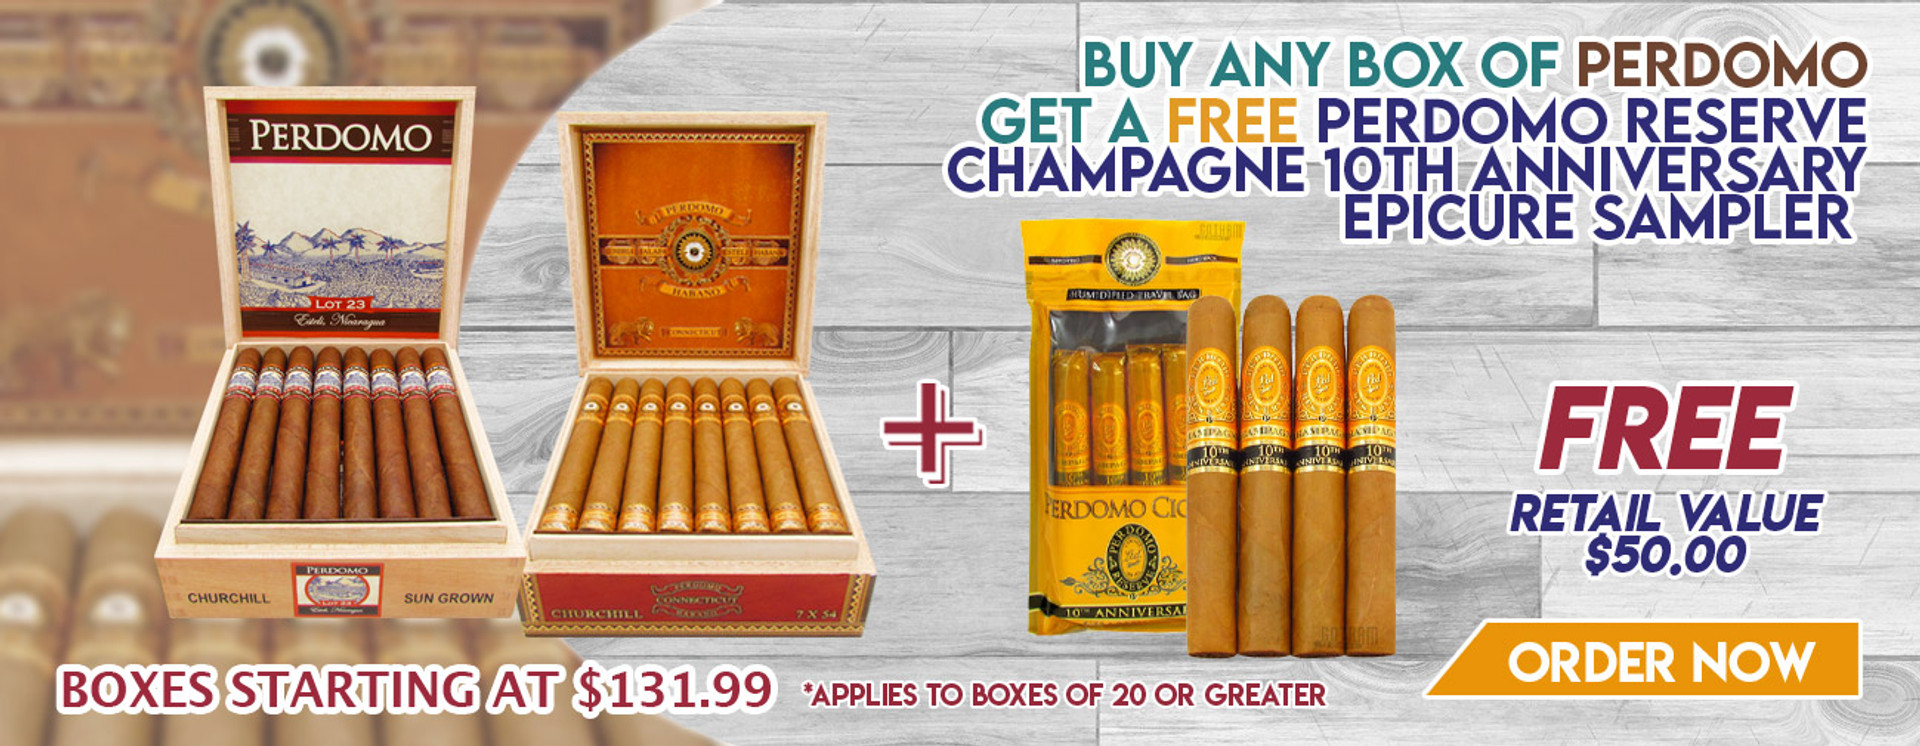 Buy any box of Perdomo get a FREE Perdomo reserve champagne 10th anniversary epicure sampler